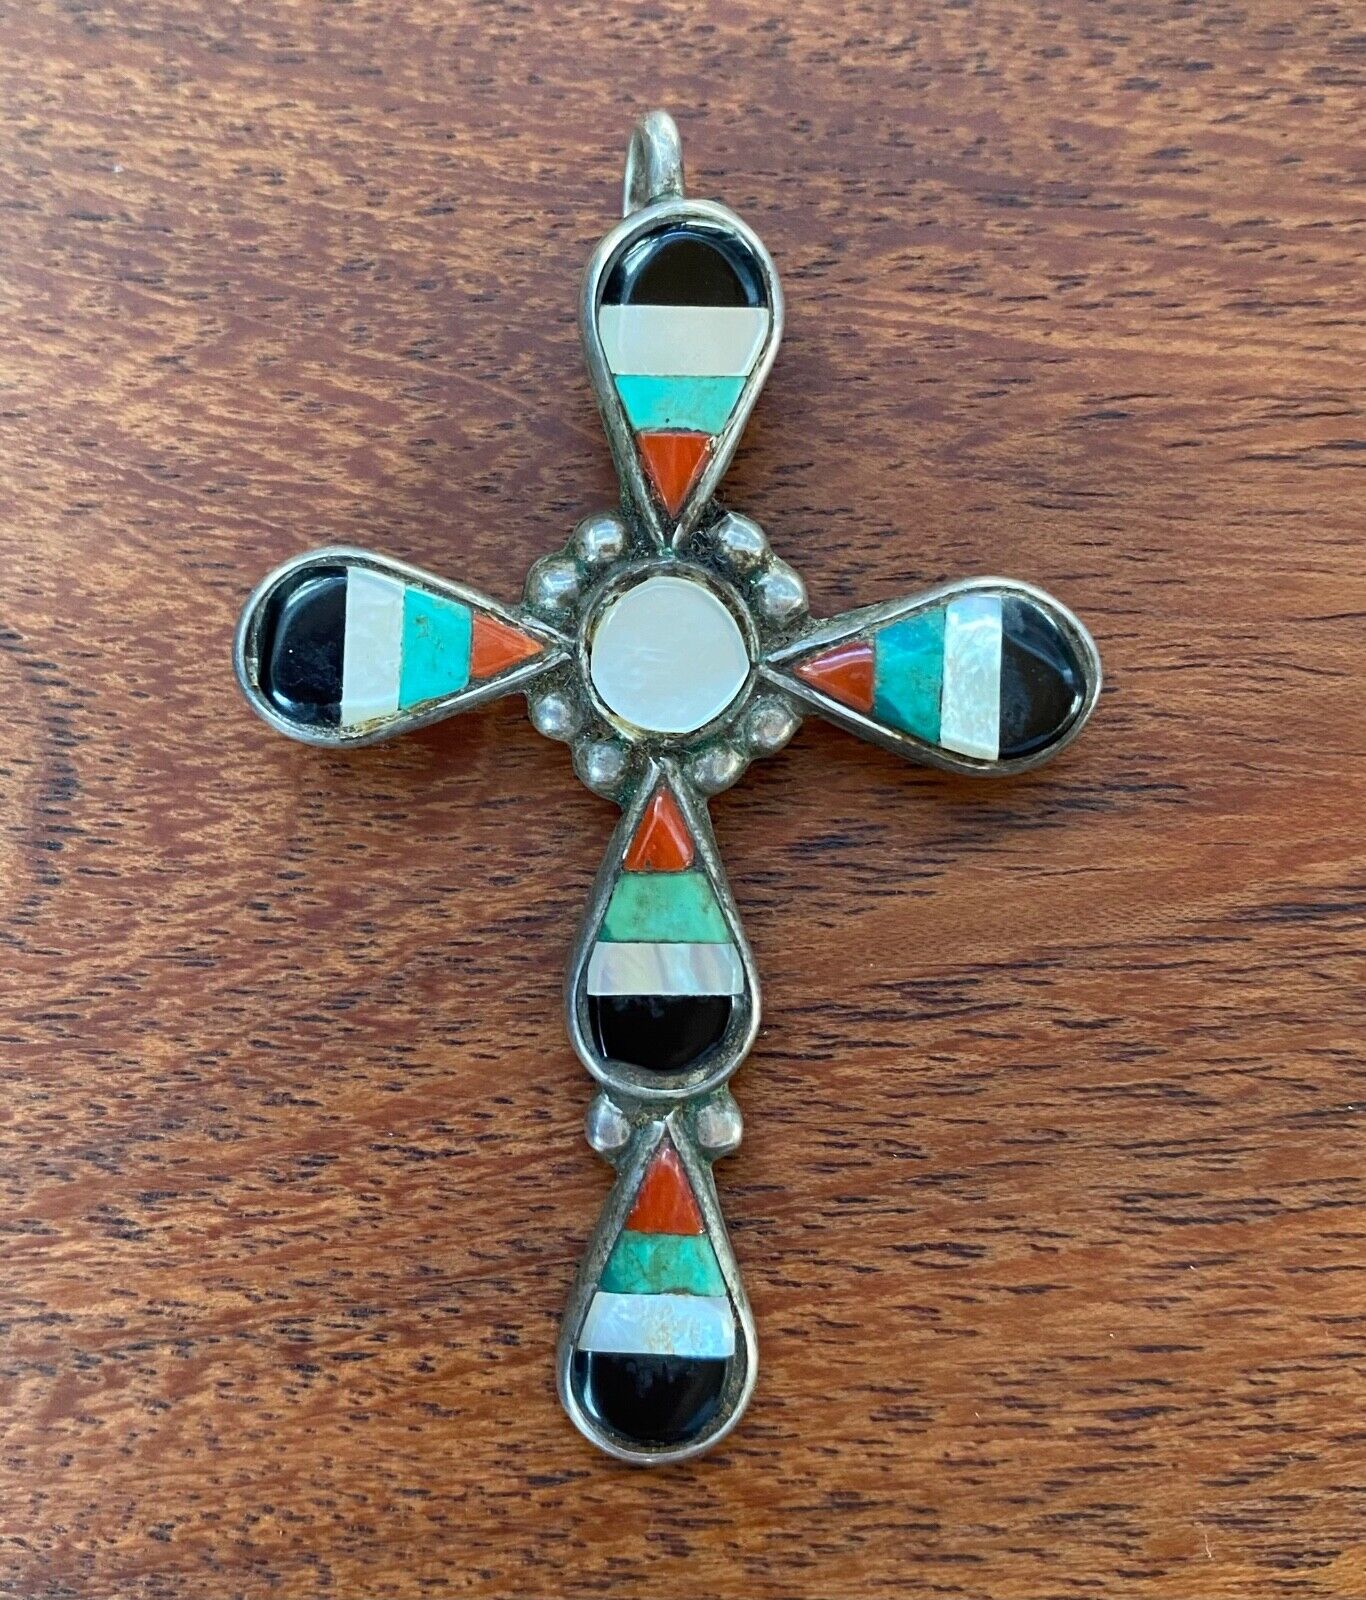 Old Zuni Native American Sterling Silver Inlay Cross-Signed